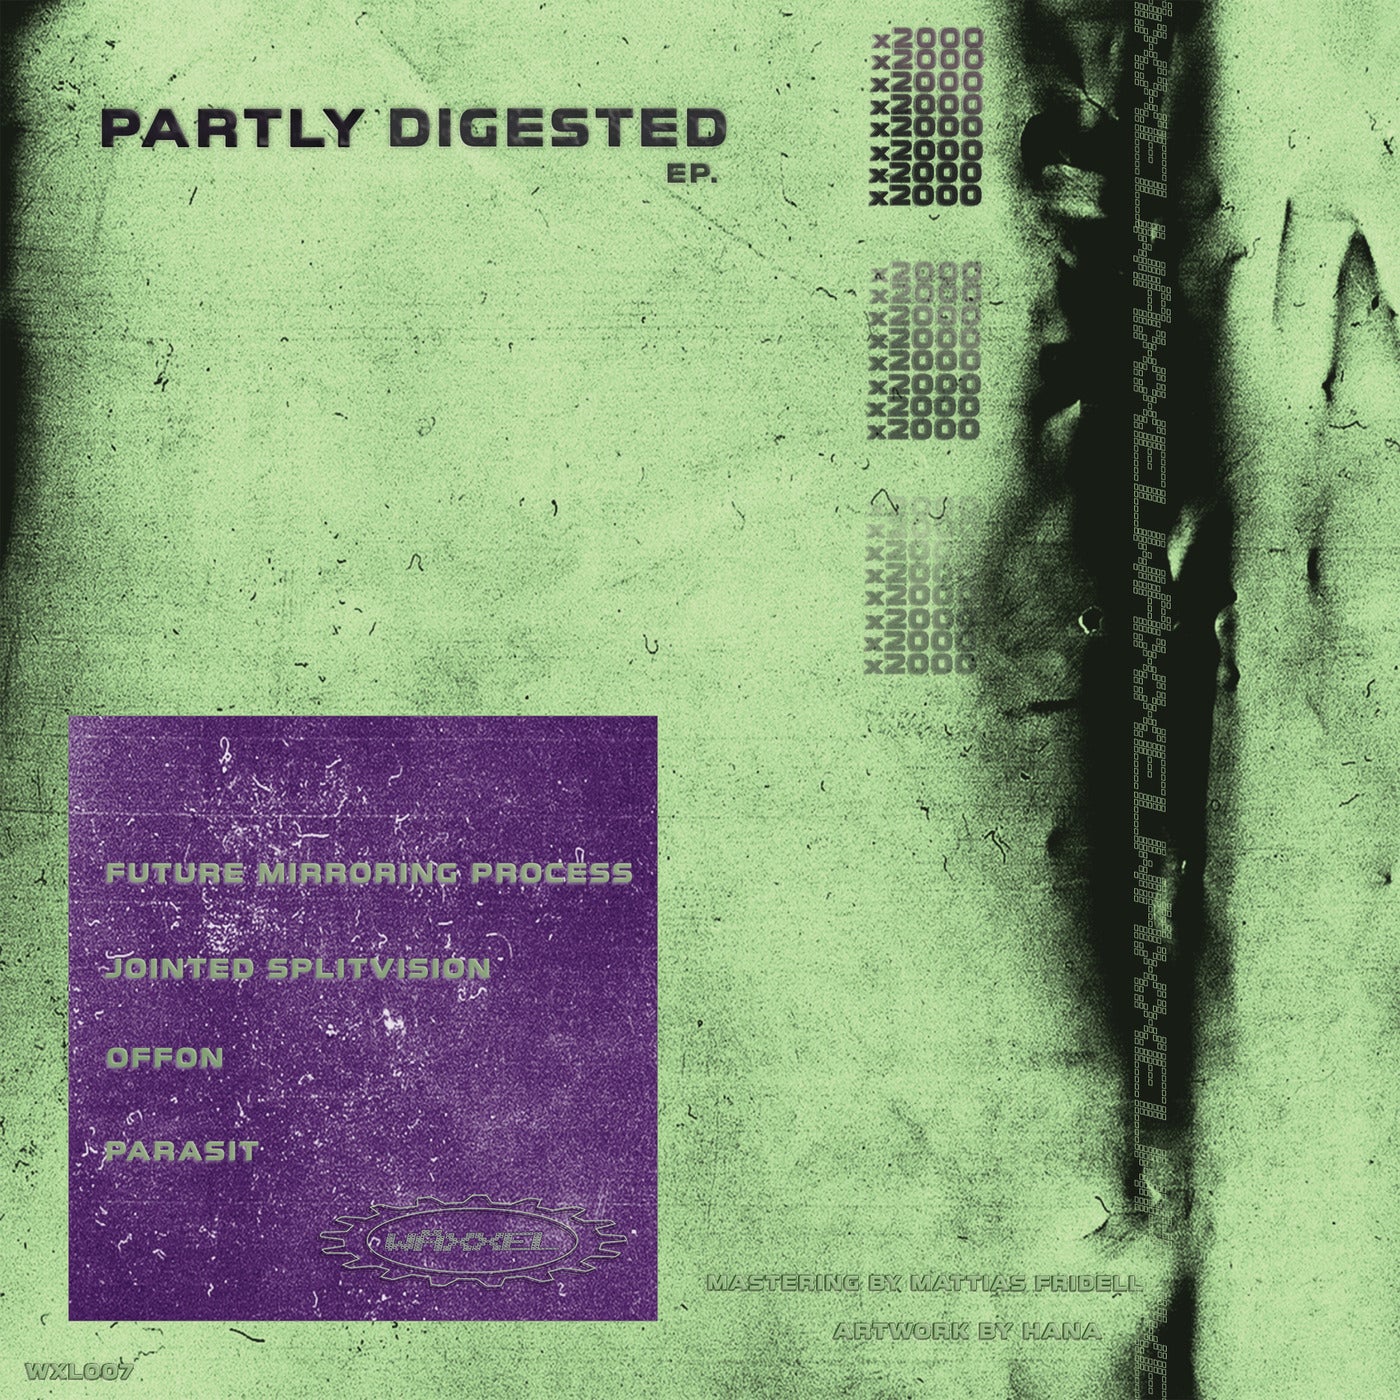 Partly Digested EP